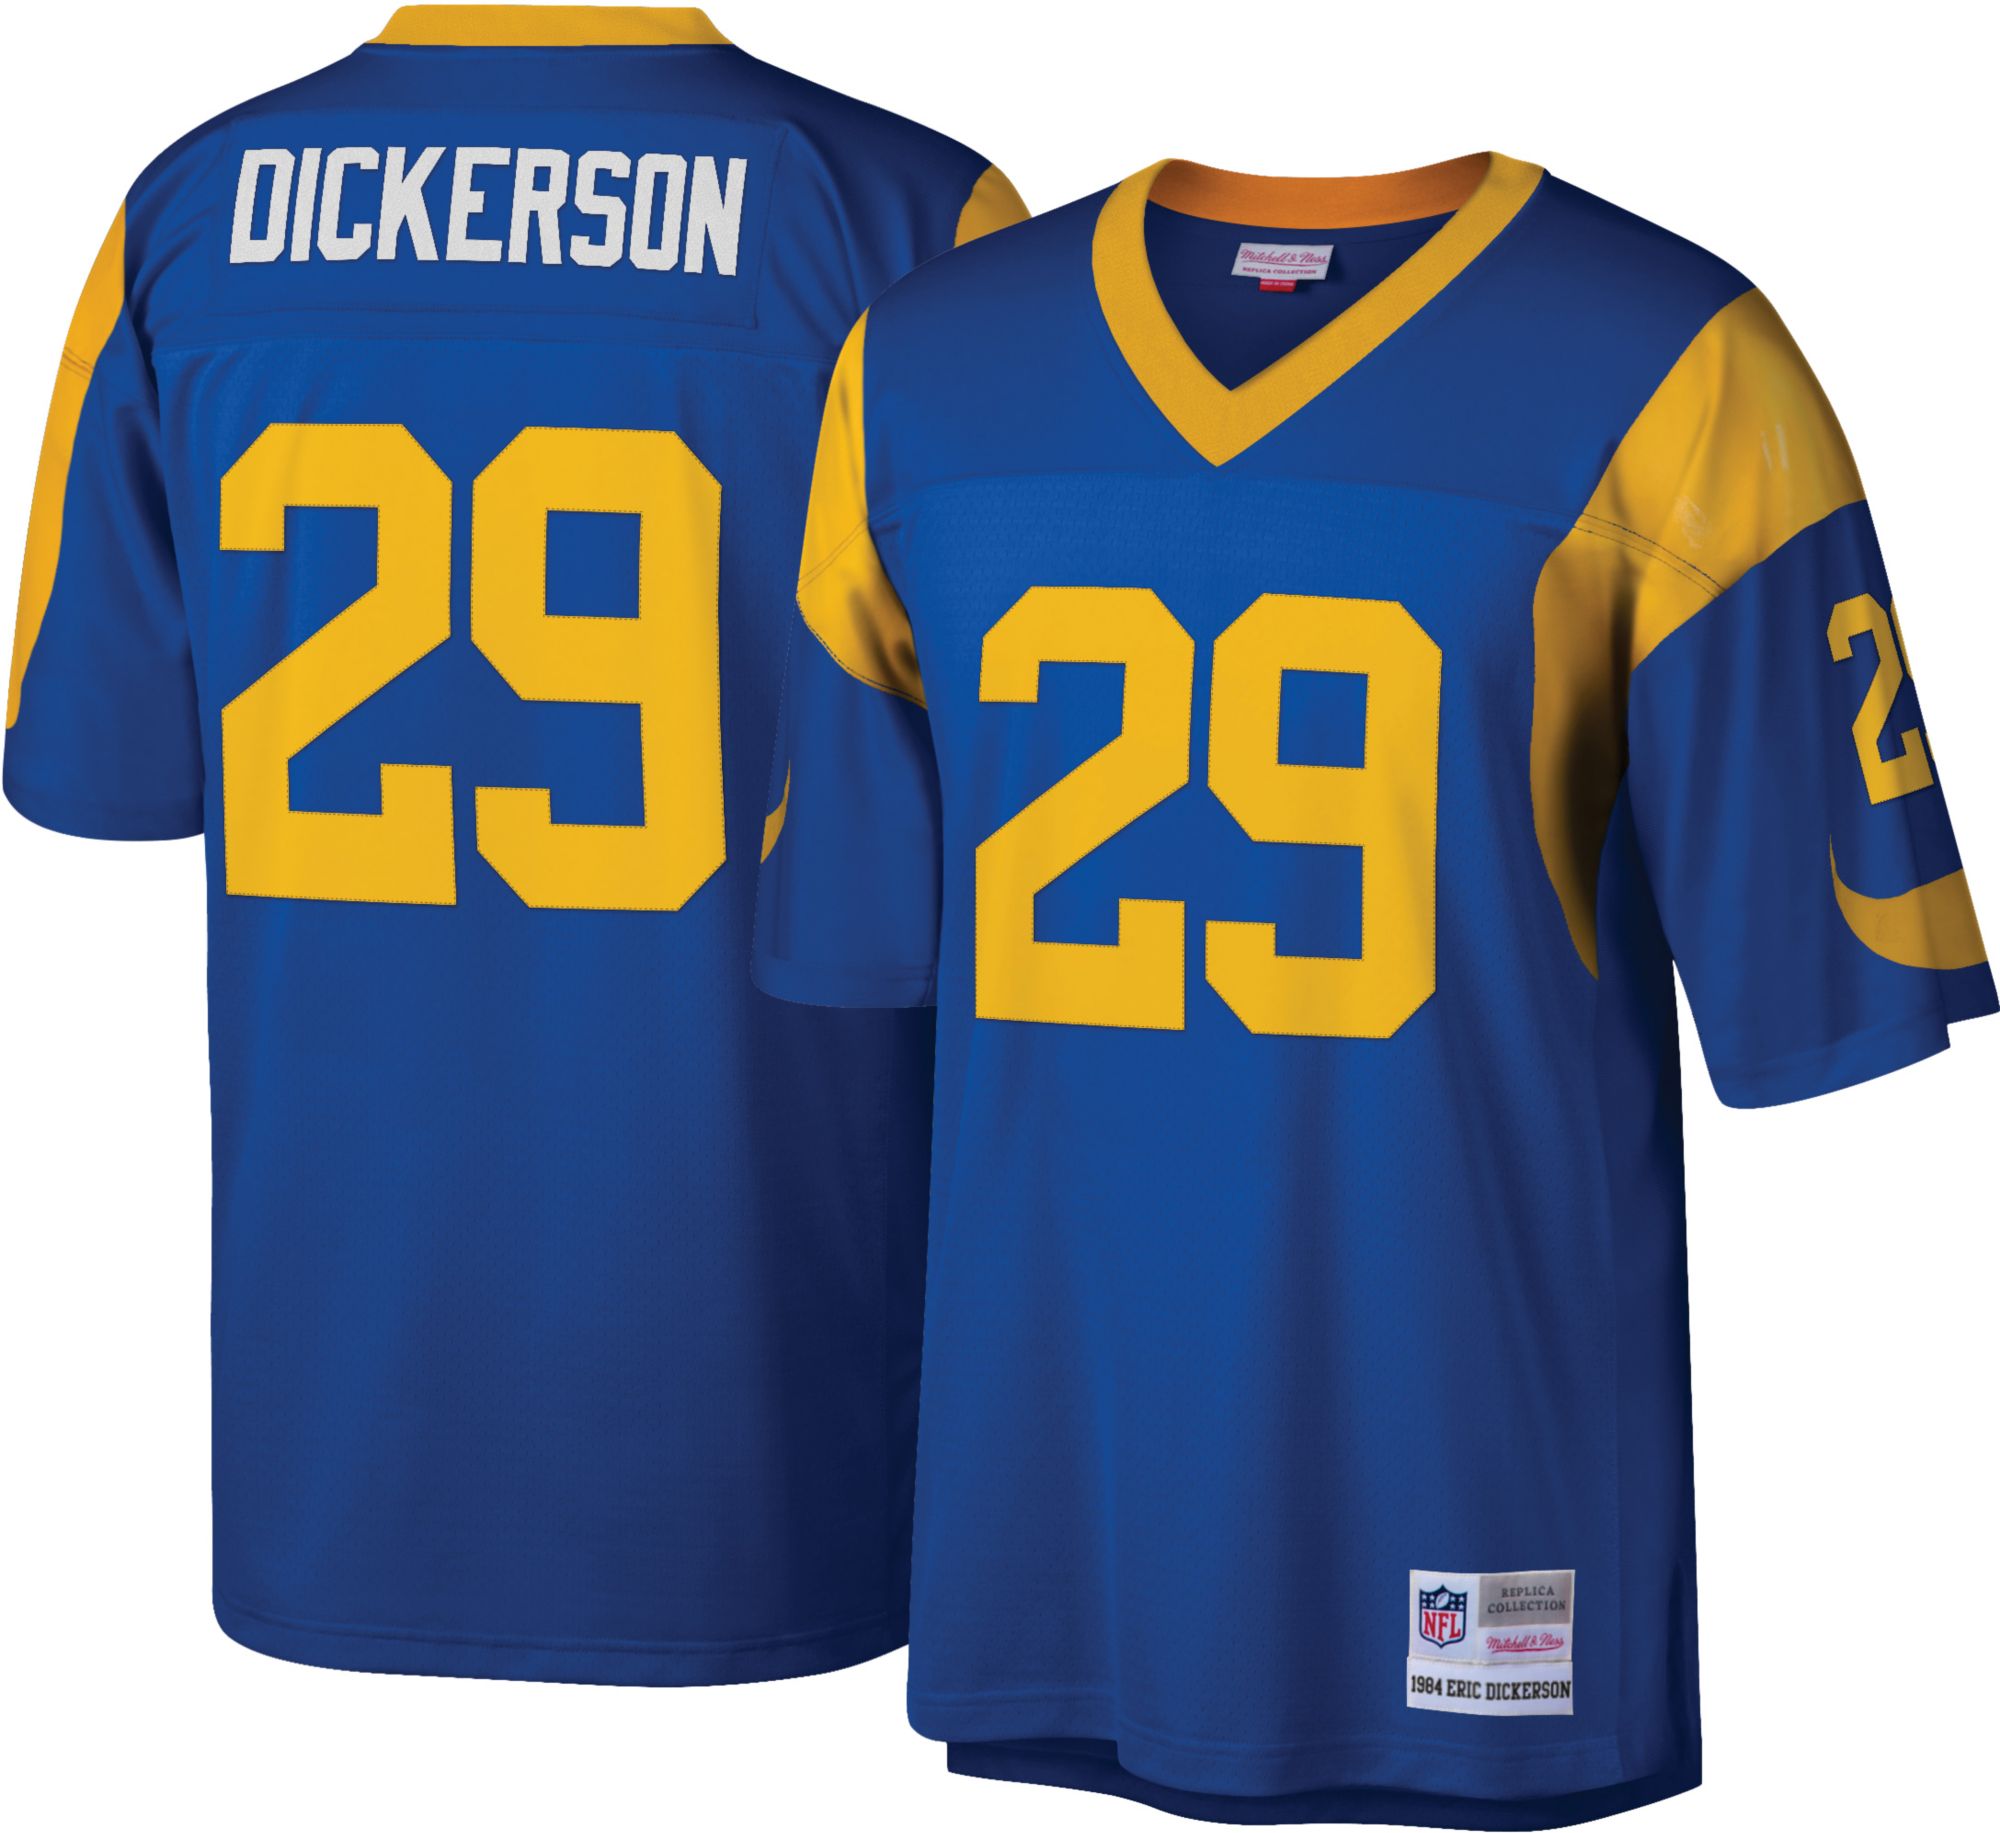 where to buy a rams jersey